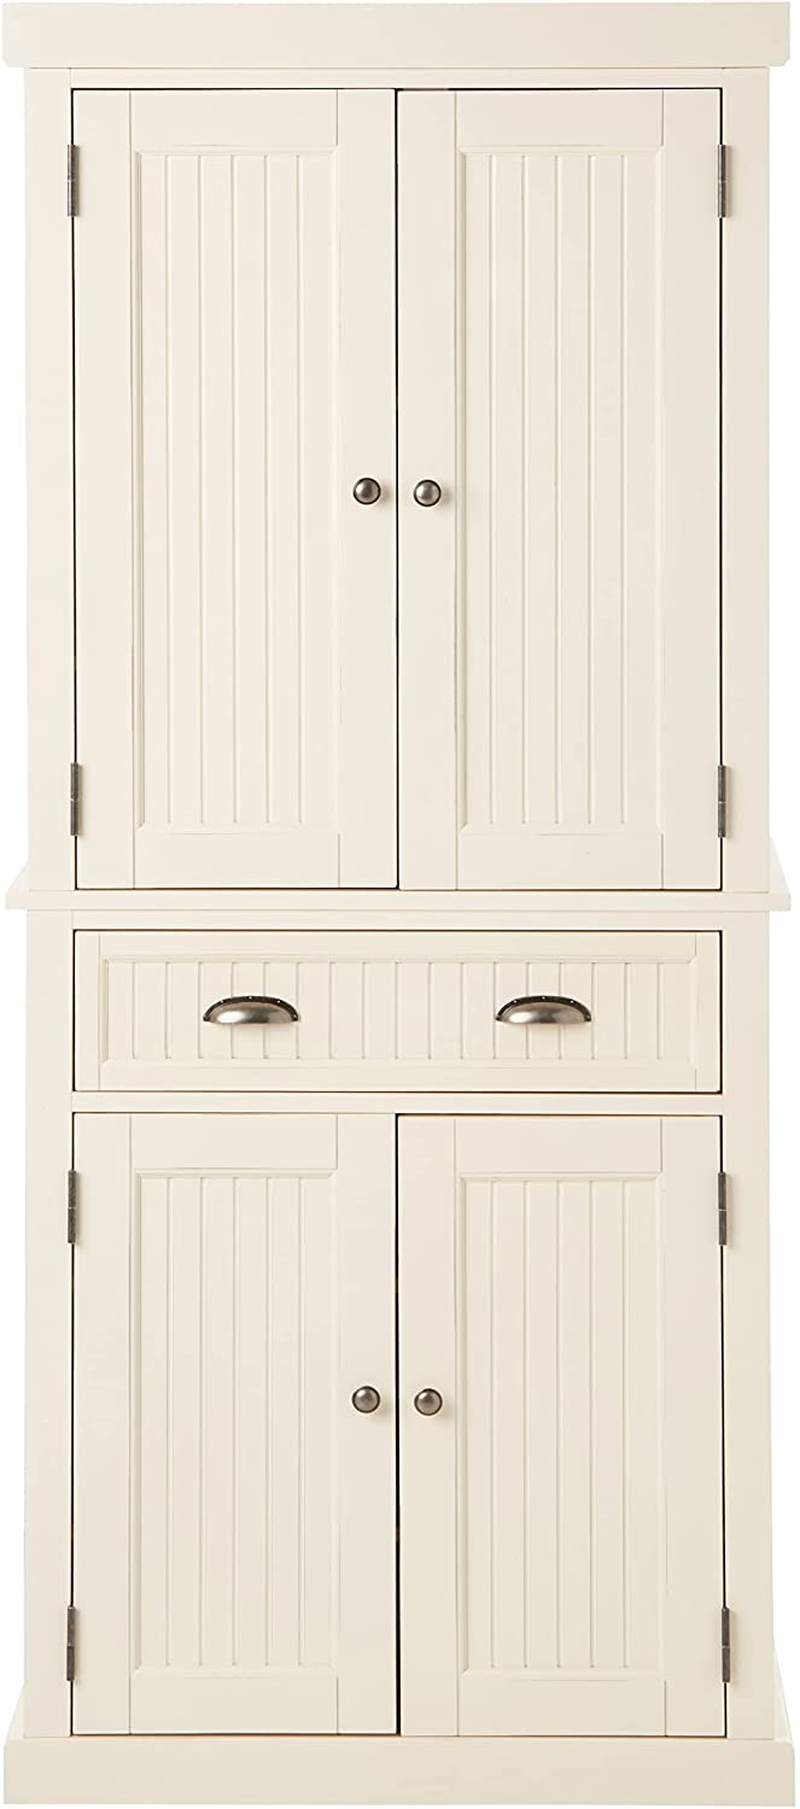 Homestyles Nantucket Pantry, 30", off White